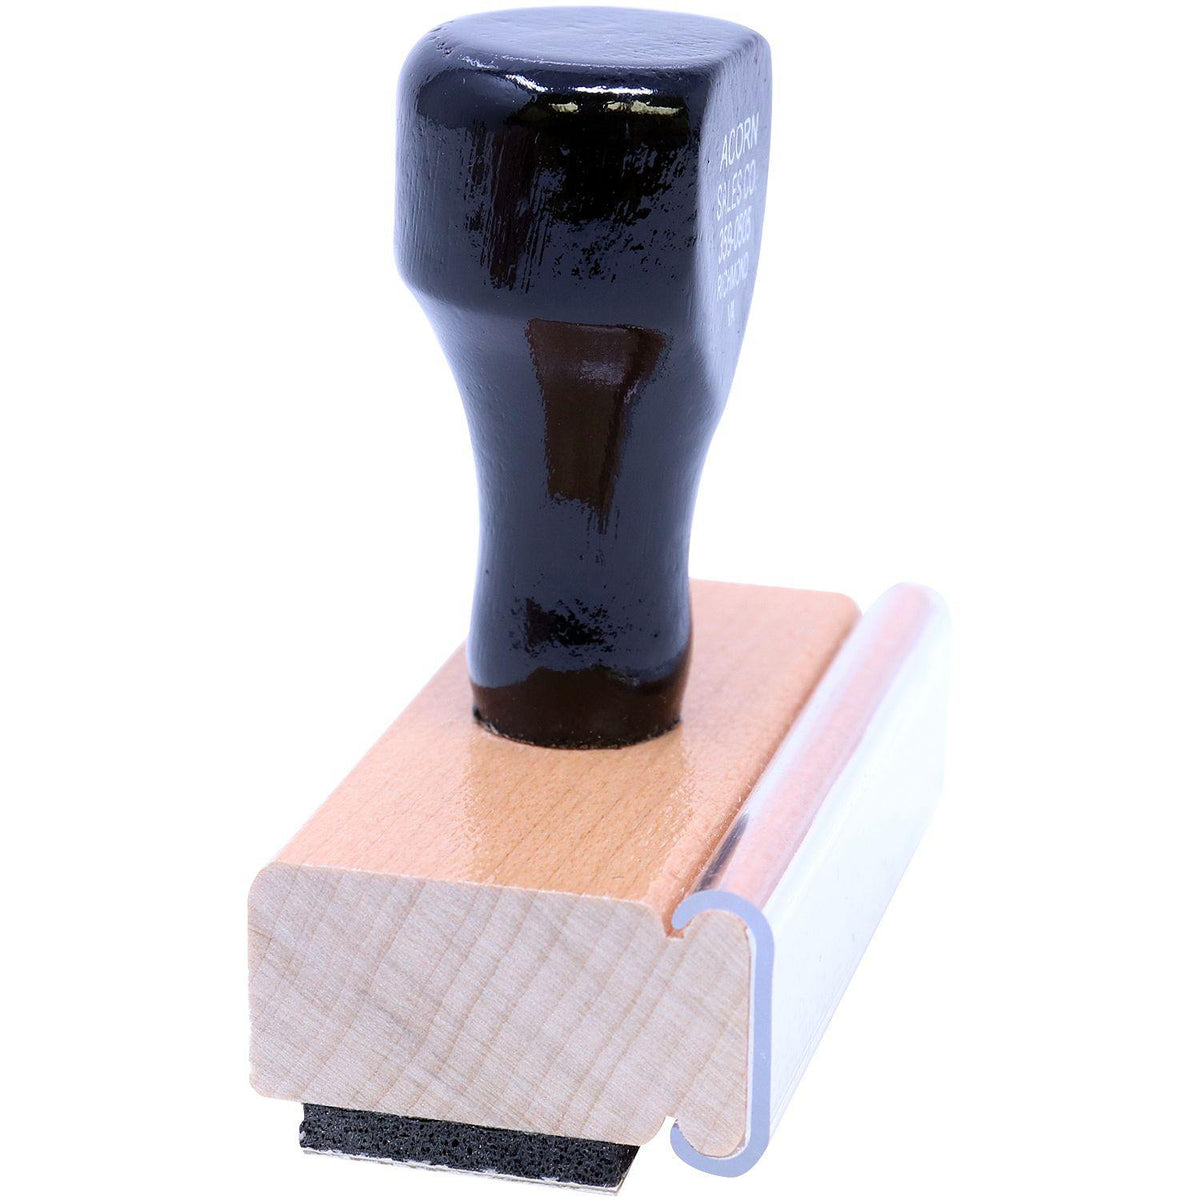 Side View of Large Fax Memo Rubber Stamp at an Angle